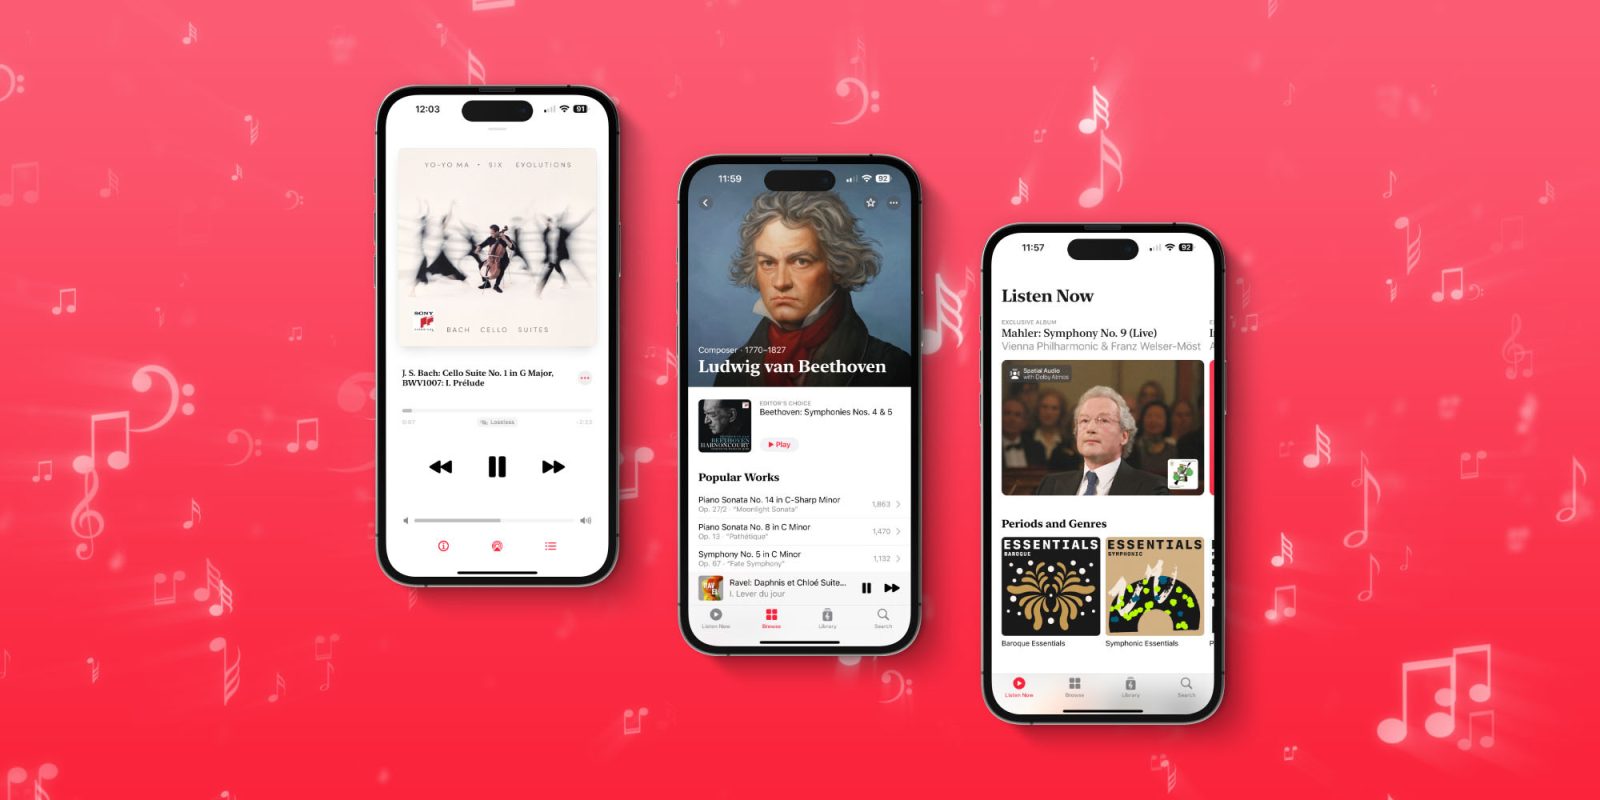 Hands-on: Here’s how Apple Music Classical design looks [Gallery]